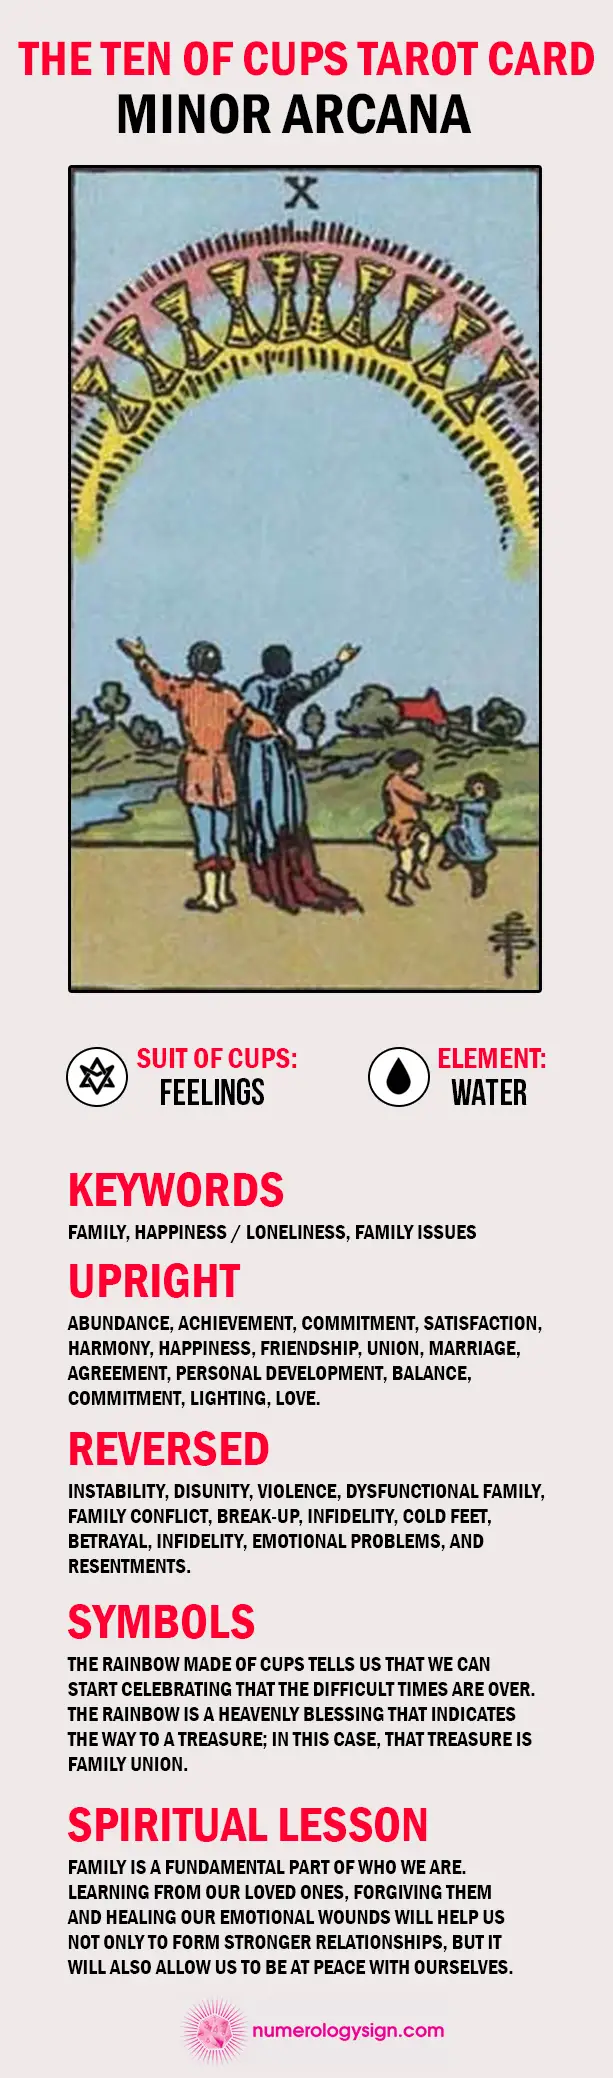 The Ten of Cups Tarot Card Meaning Infographic - Minor Arcana